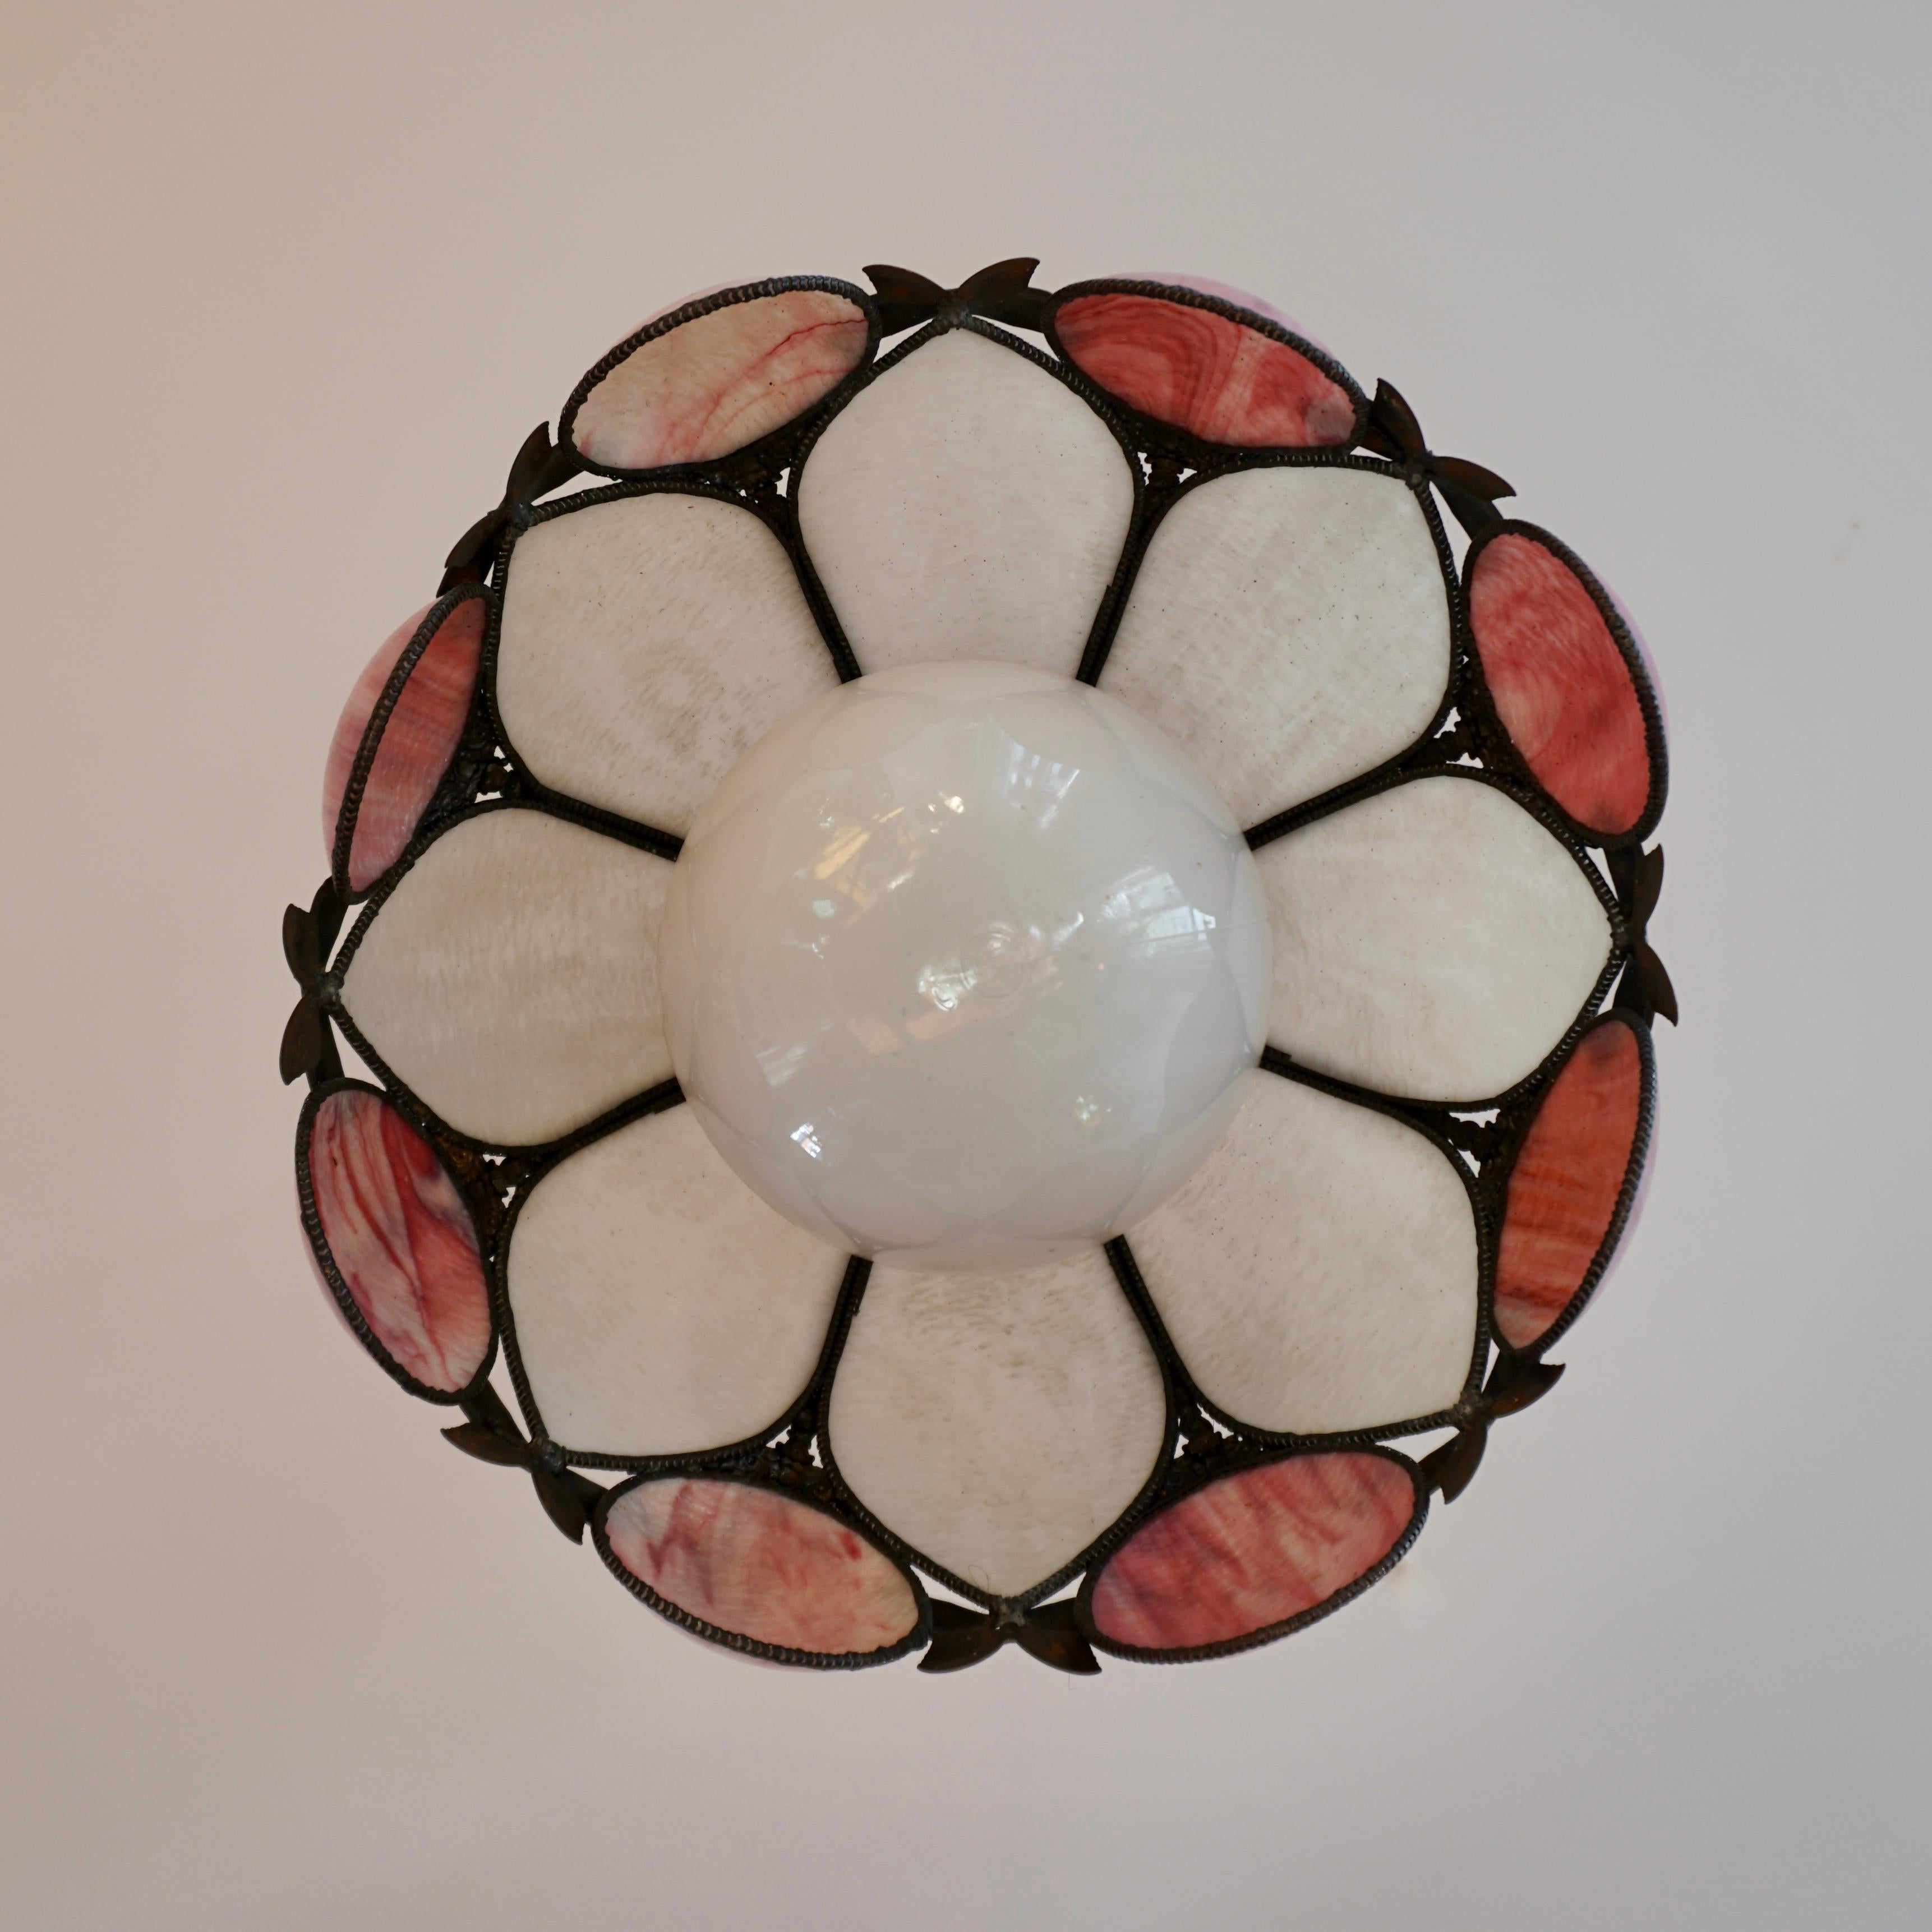 20th Century Lotus Shaped Leaded Glass Light Fixture For Sale